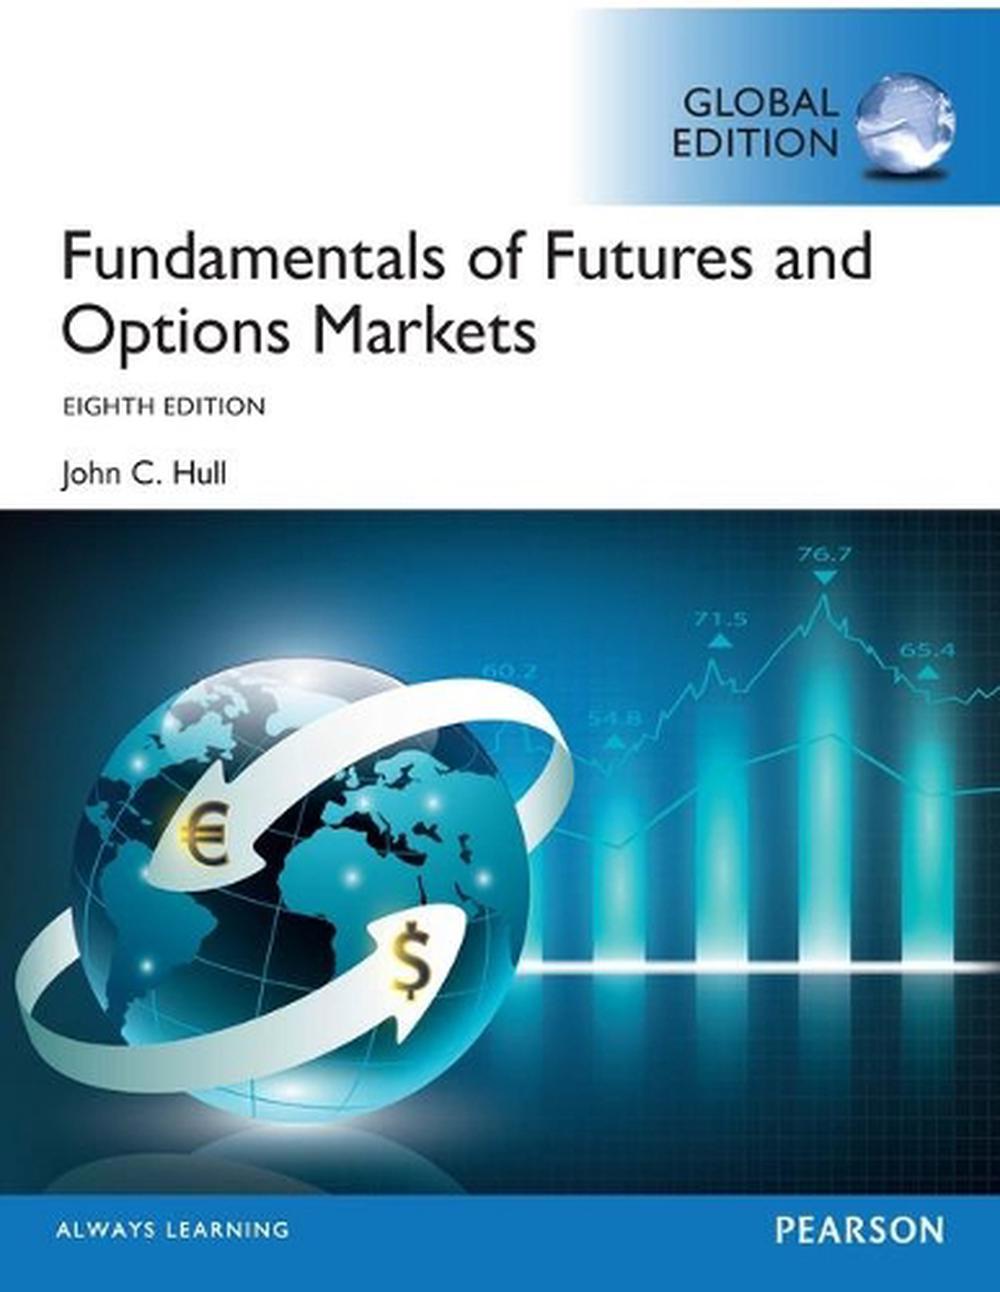 Fundamentals of Futures & Options Markets, Global Edition, 8th Edition